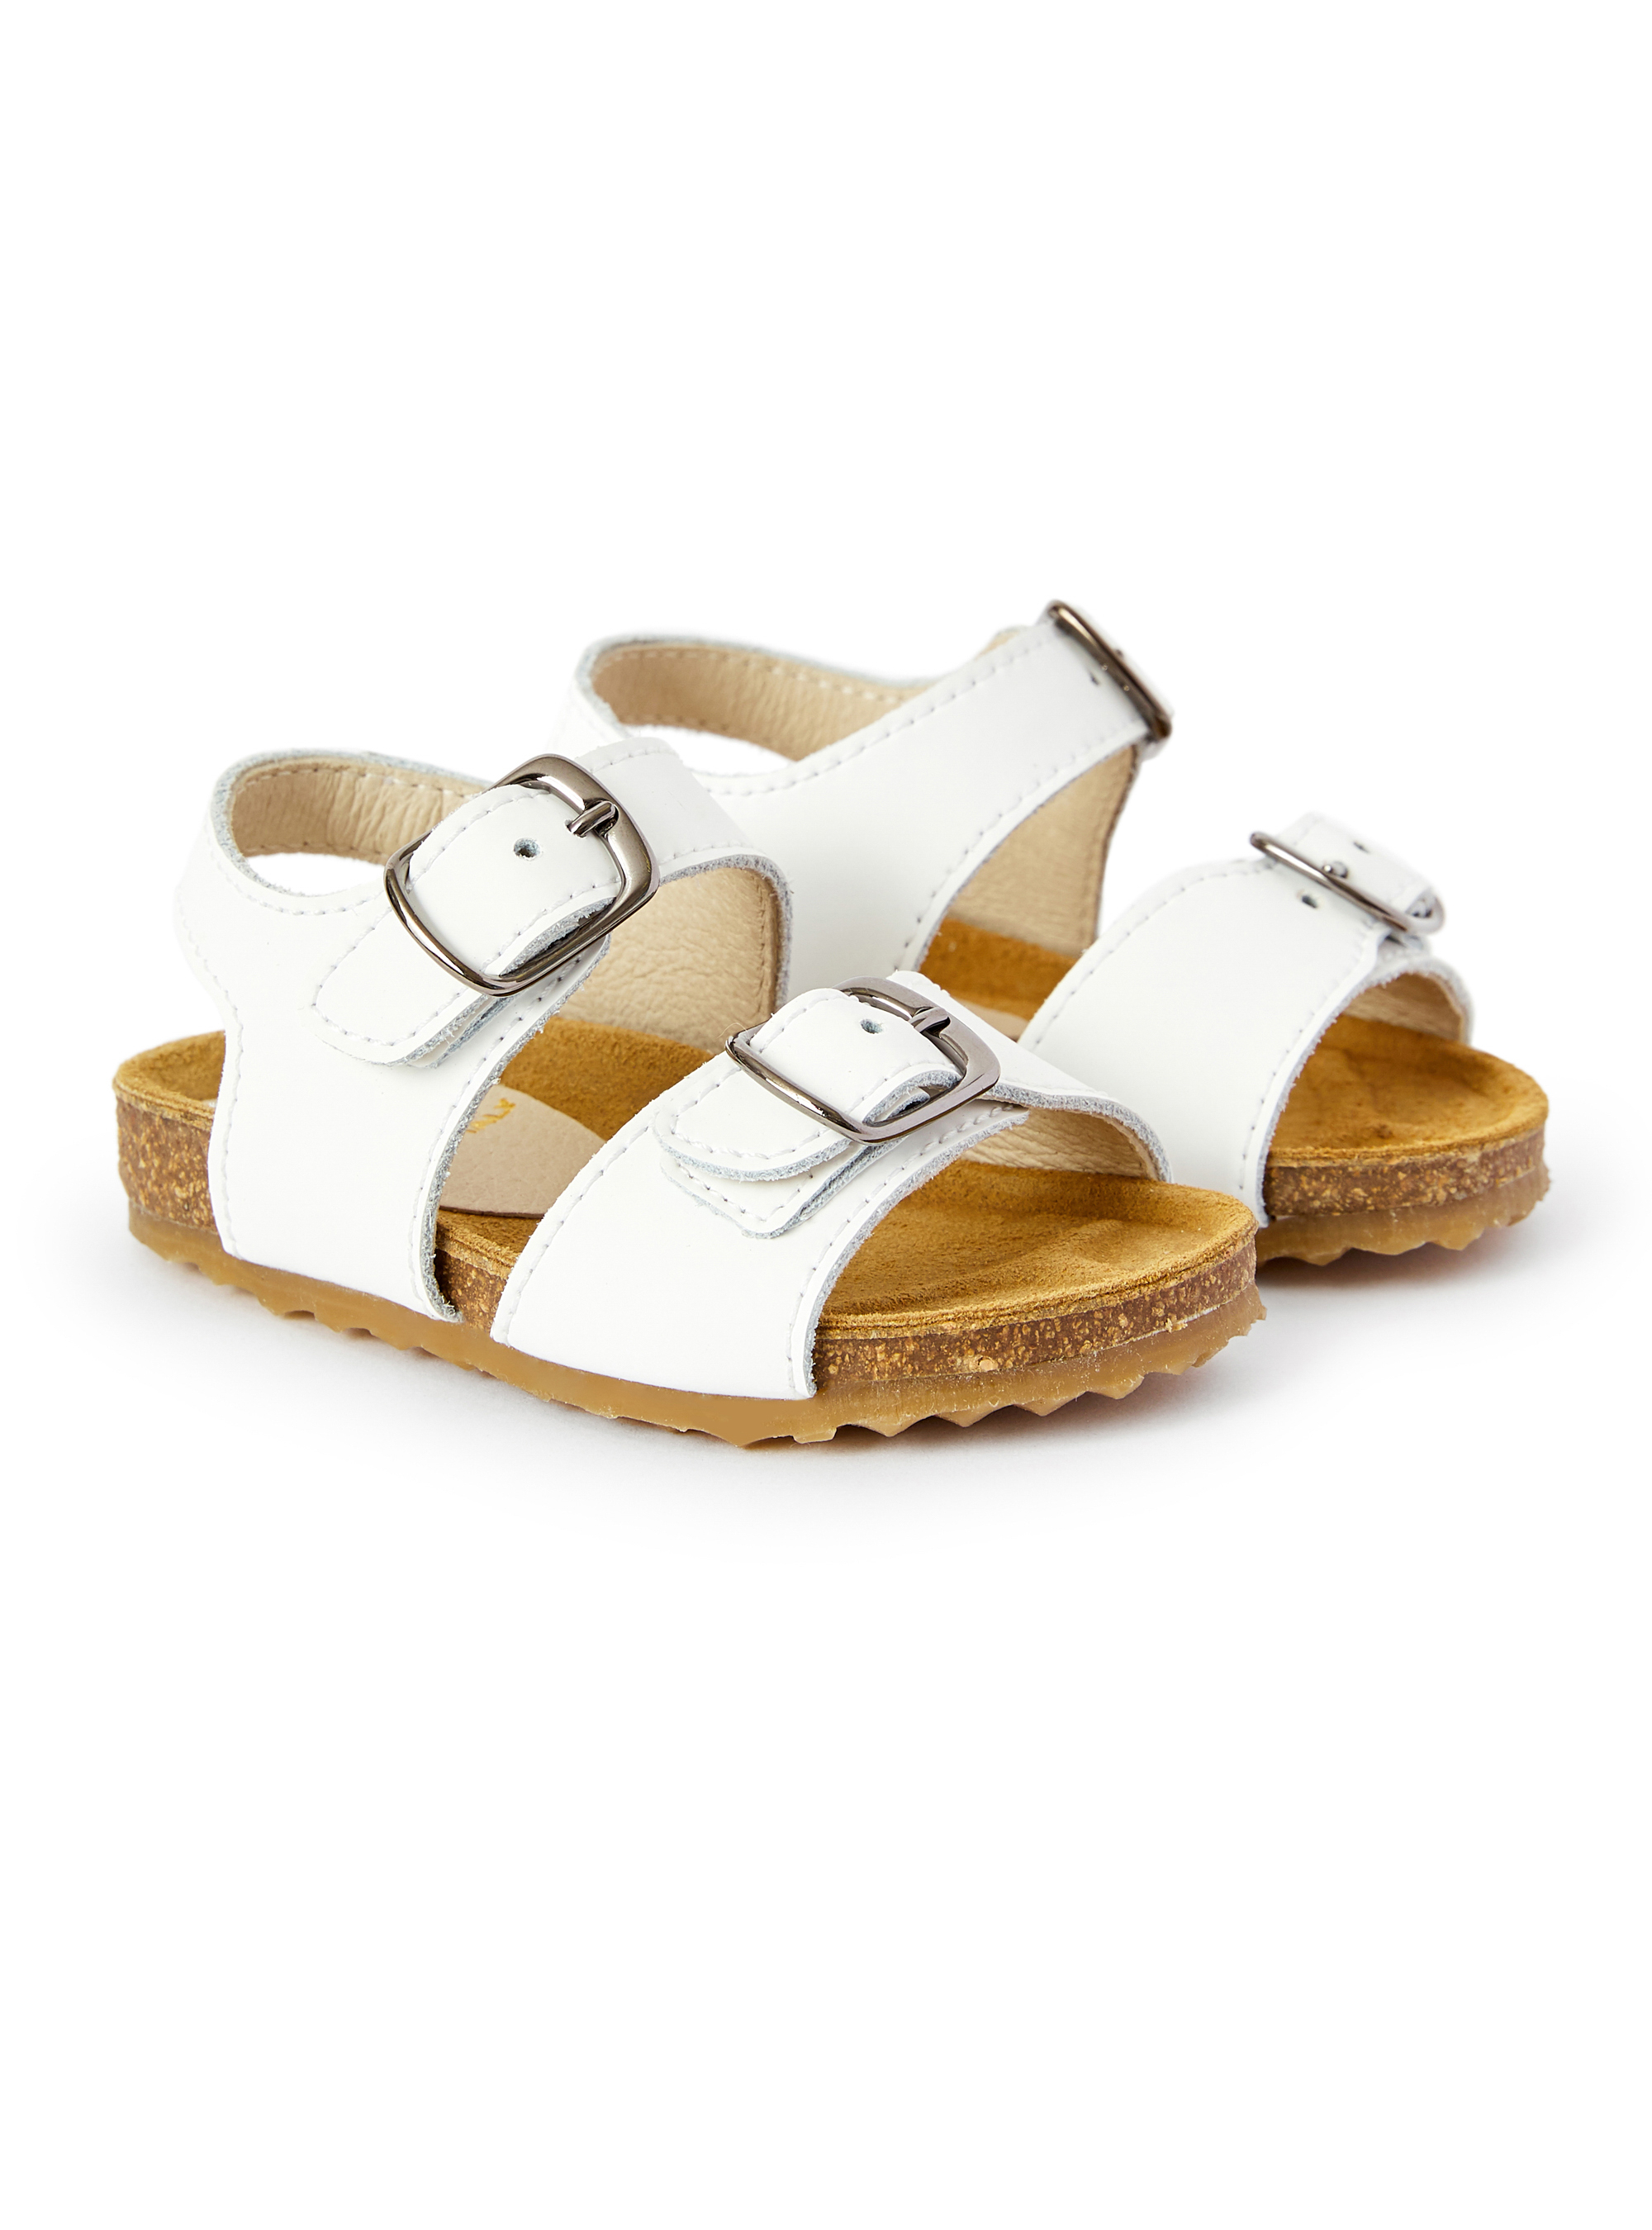 White leather sandal with buckles - Shoes - Il Gufo